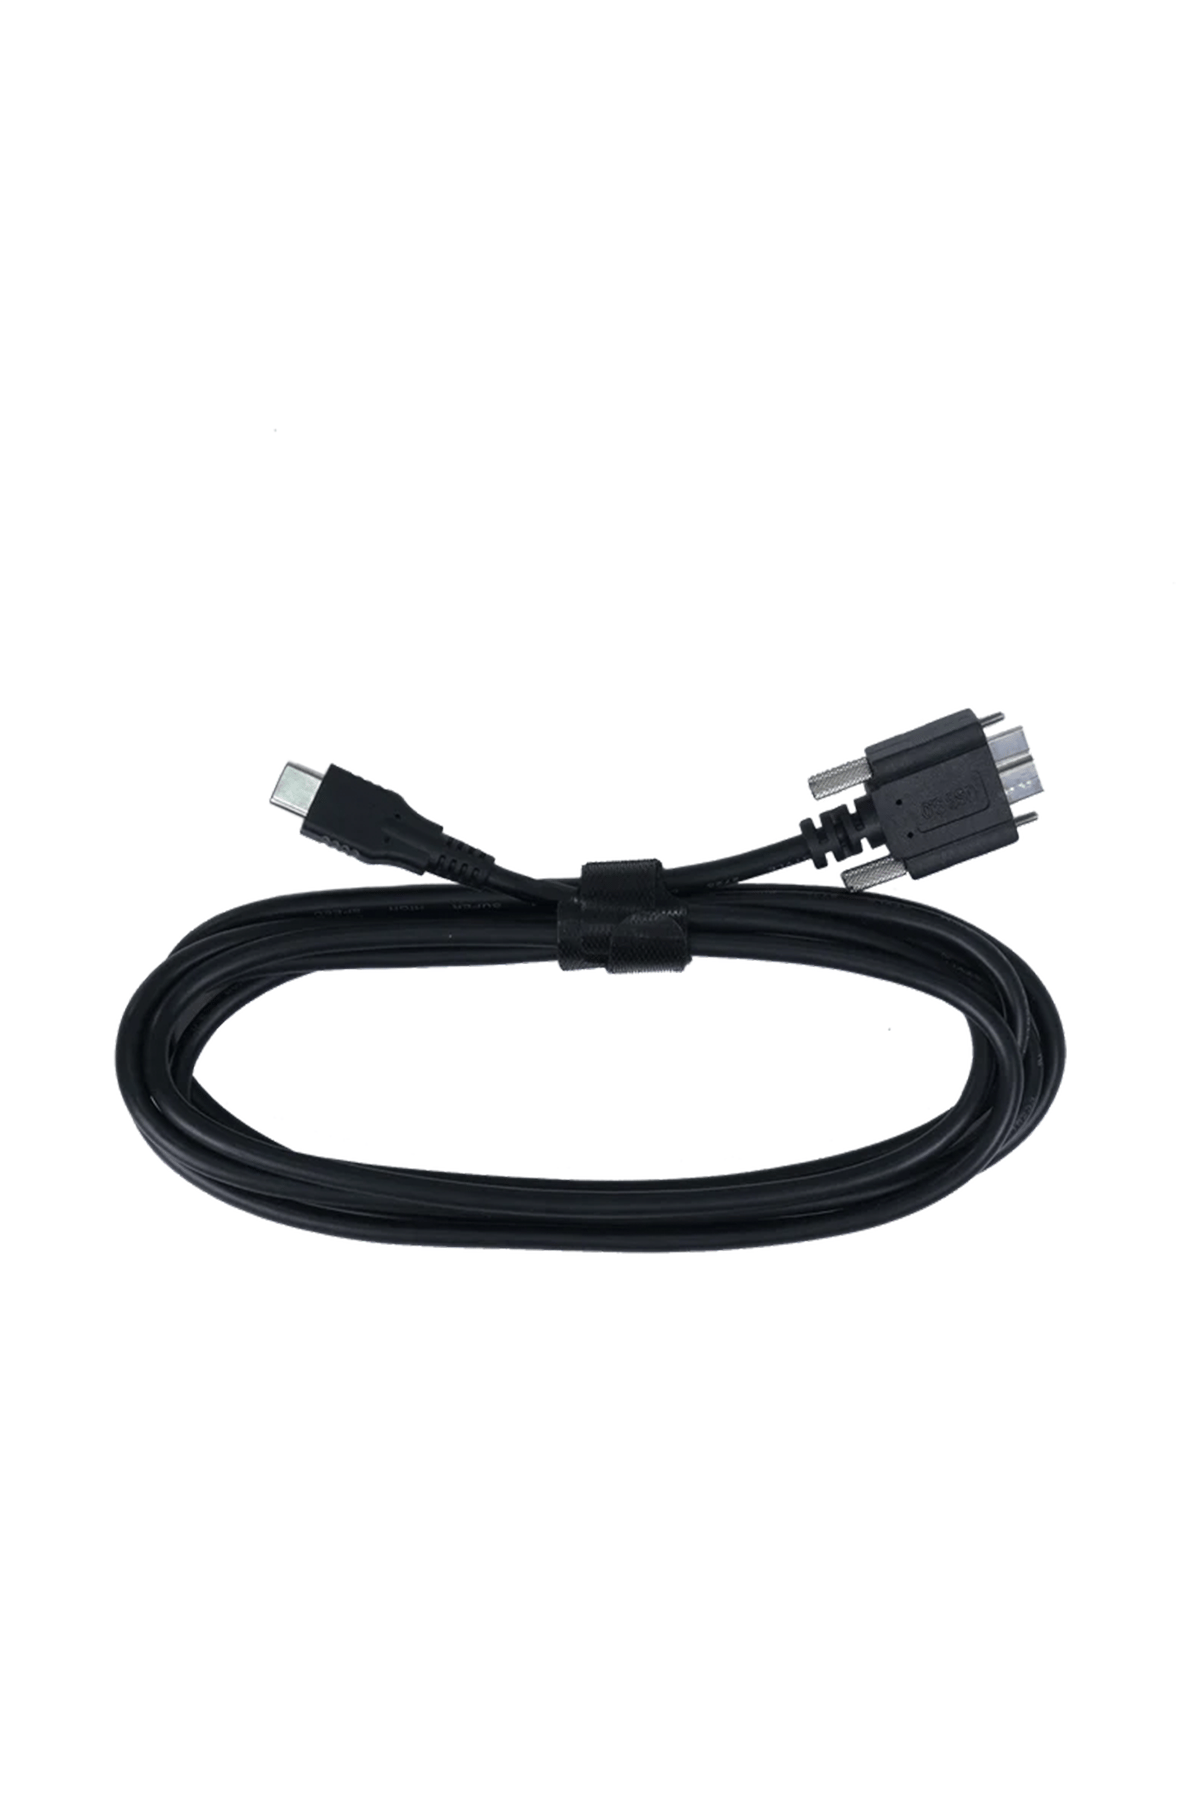 Revopoint USB Type C Cable